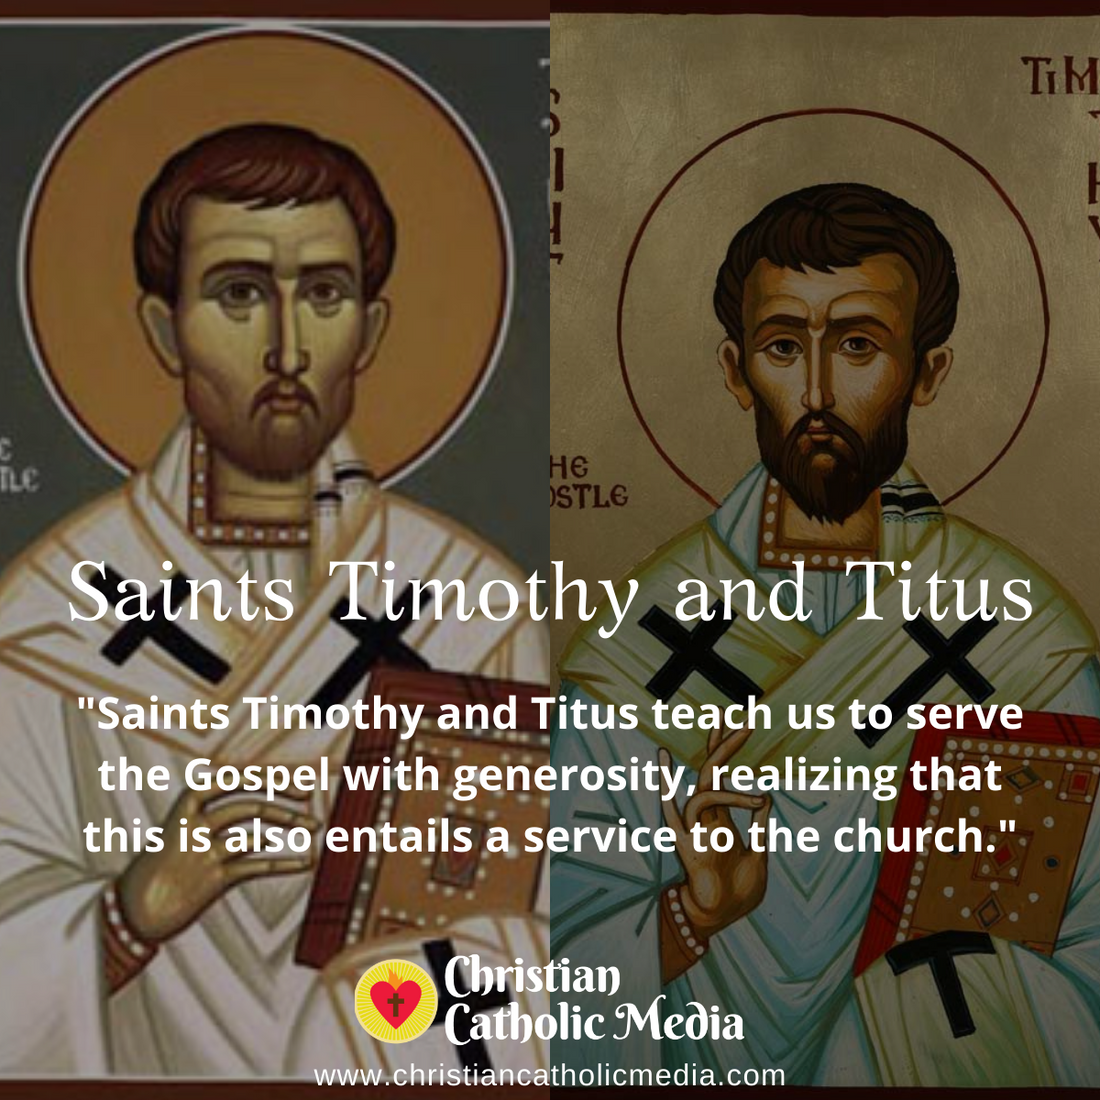 St. Timothy and Titus - Wednesday January 26, 2022